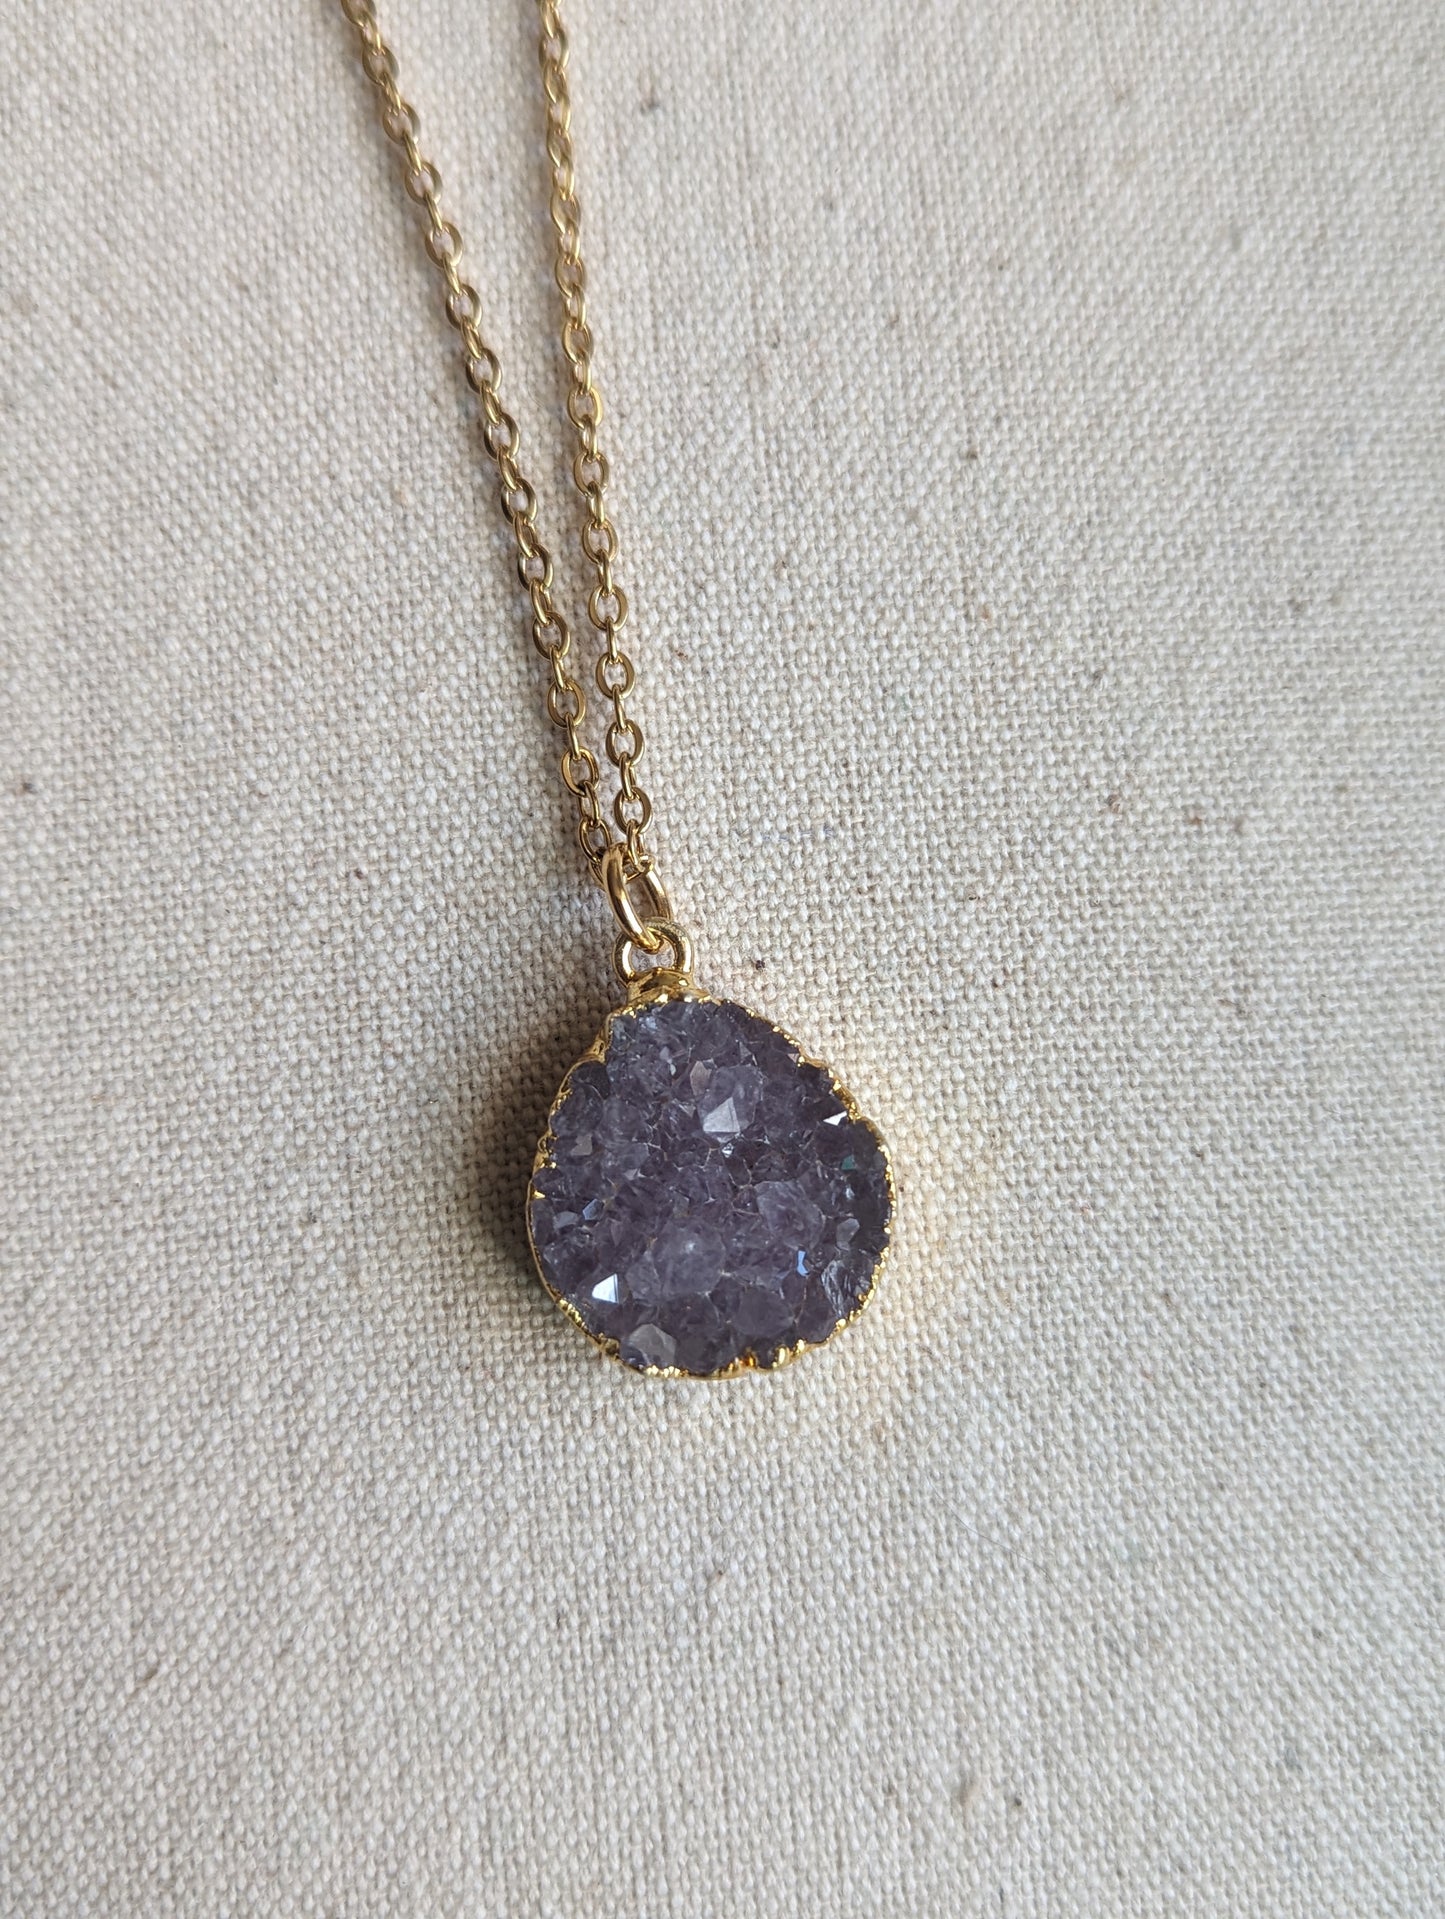 Large Purple Druzy Pendant in Gold Plated Stainless Steel